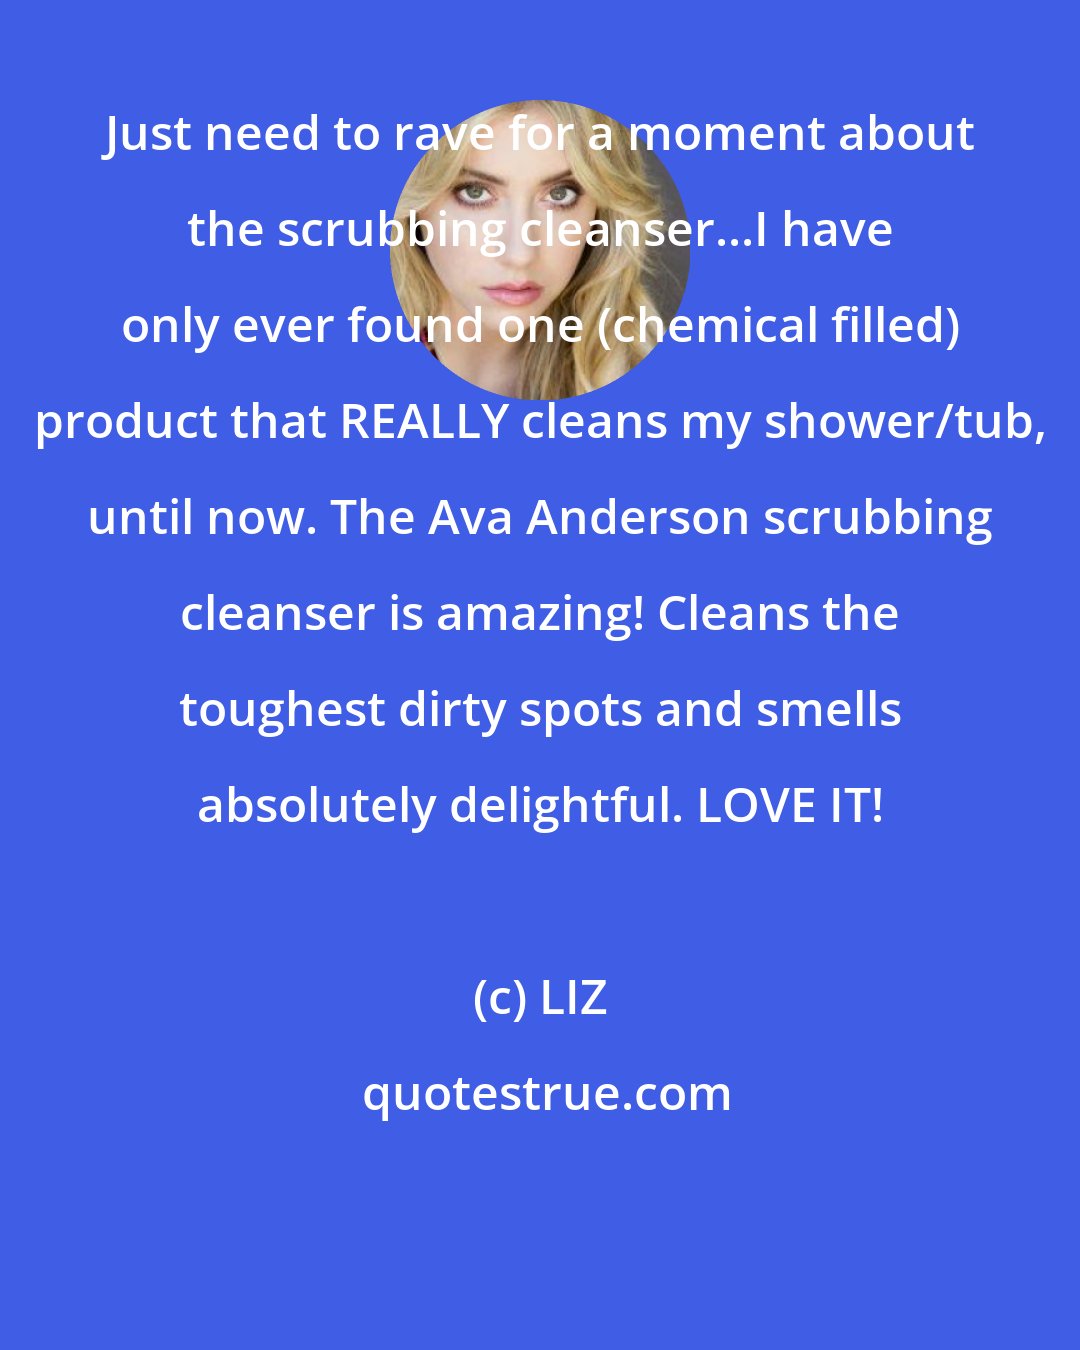 LIZ: Just need to rave for a moment about the scrubbing cleanser...I have only ever found one (chemical filled) product that REALLY cleans my shower/tub, until now. The Ava Anderson scrubbing cleanser is amazing! Cleans the toughest dirty spots and smells absolutely delightful. LOVE IT!